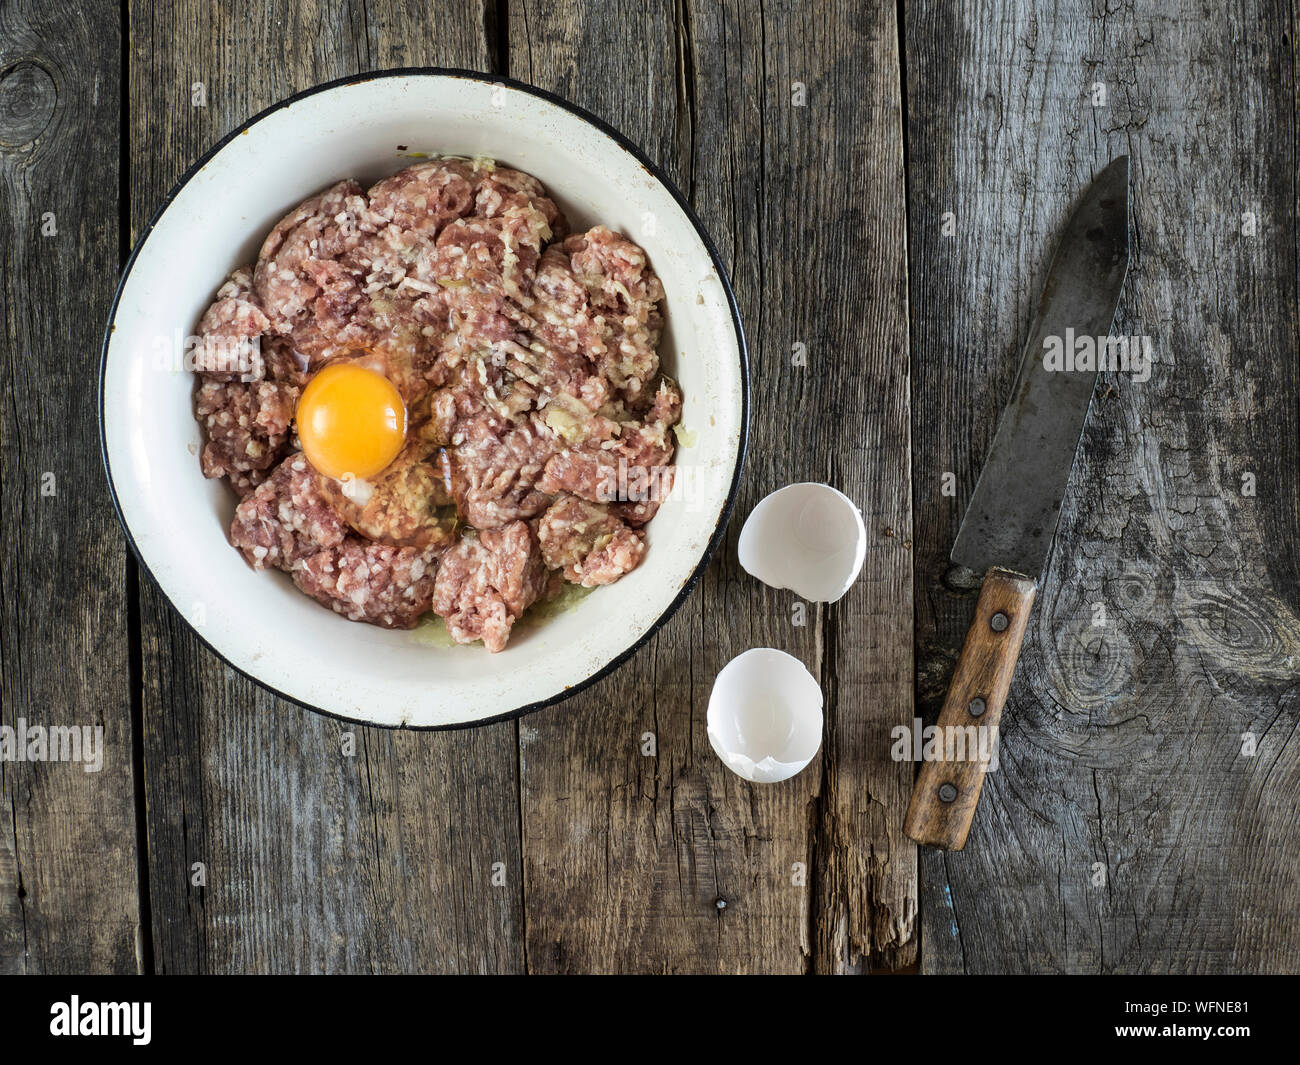 Directly Above View Of Egg Yolk With Raw Meat In Bowl By Eggshell And Knife On Wooden Table Stock Photo